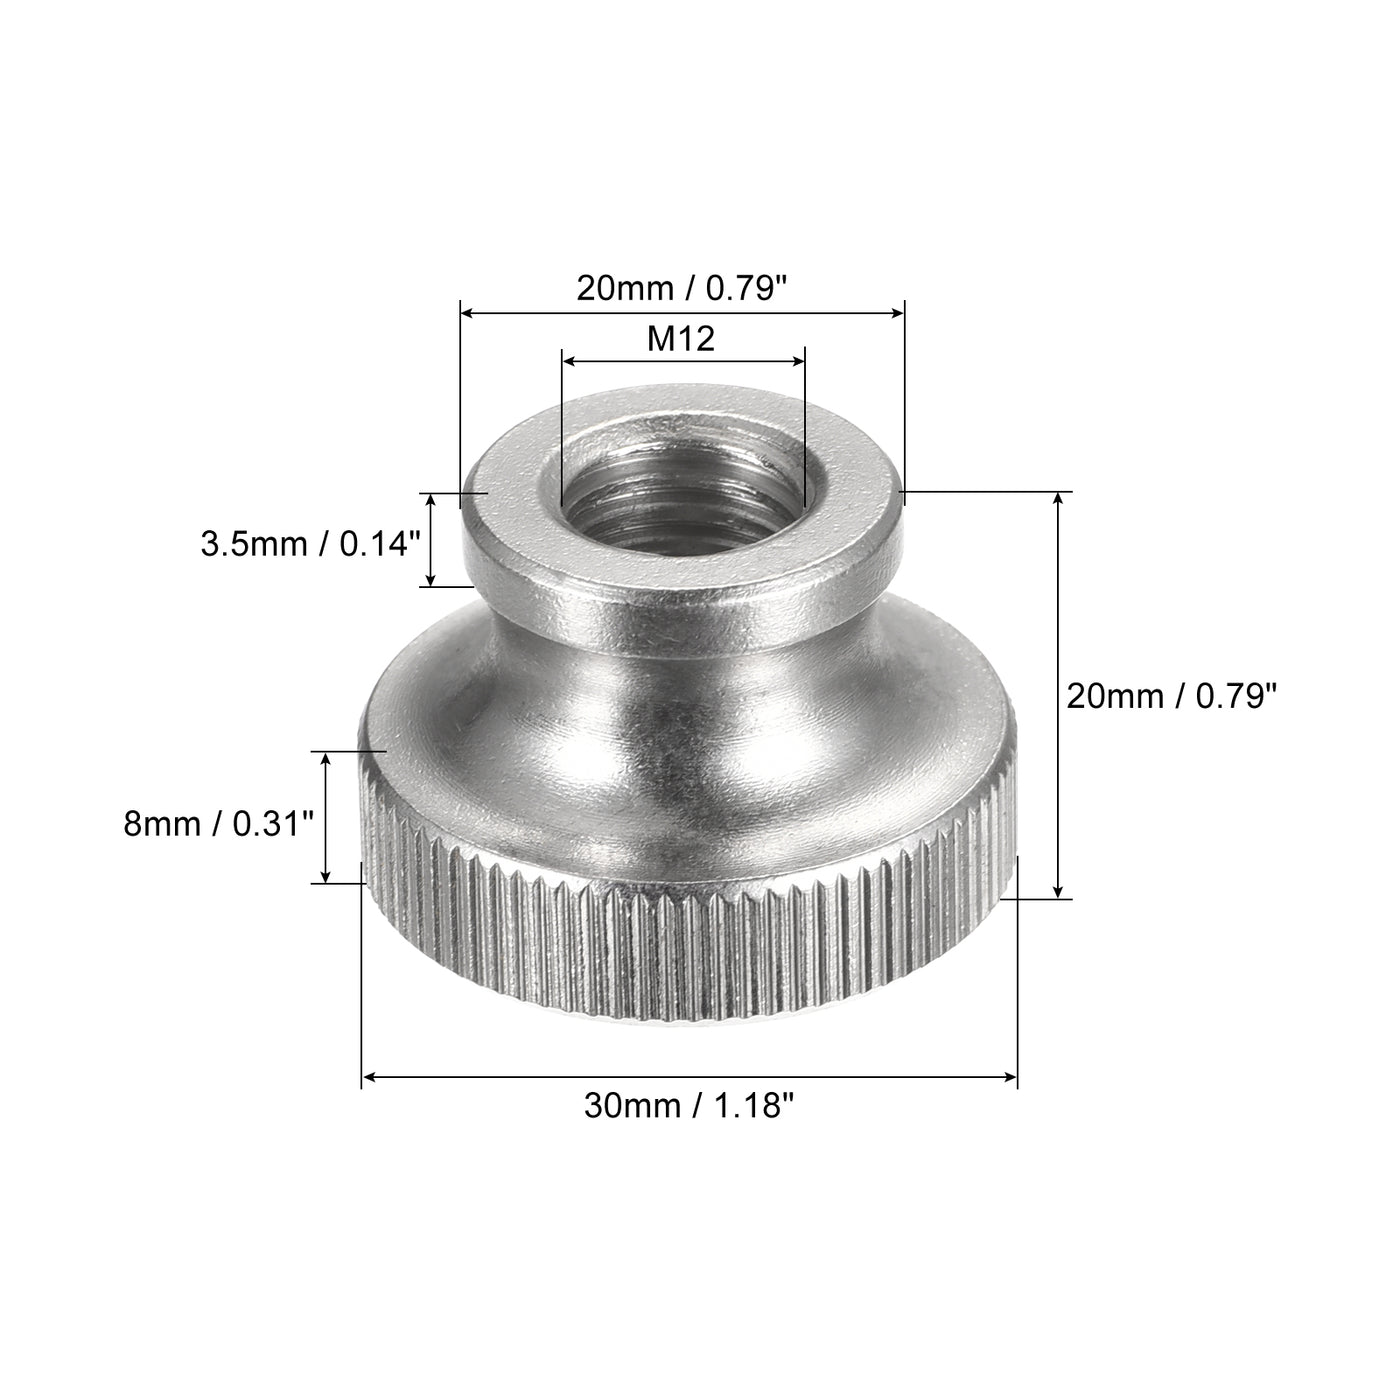 uxcell Uxcell Knurled Thumb Nuts, 4pcs M12 x D30mm x H20mm 304 Stainless Steel Blind Hole Nuts